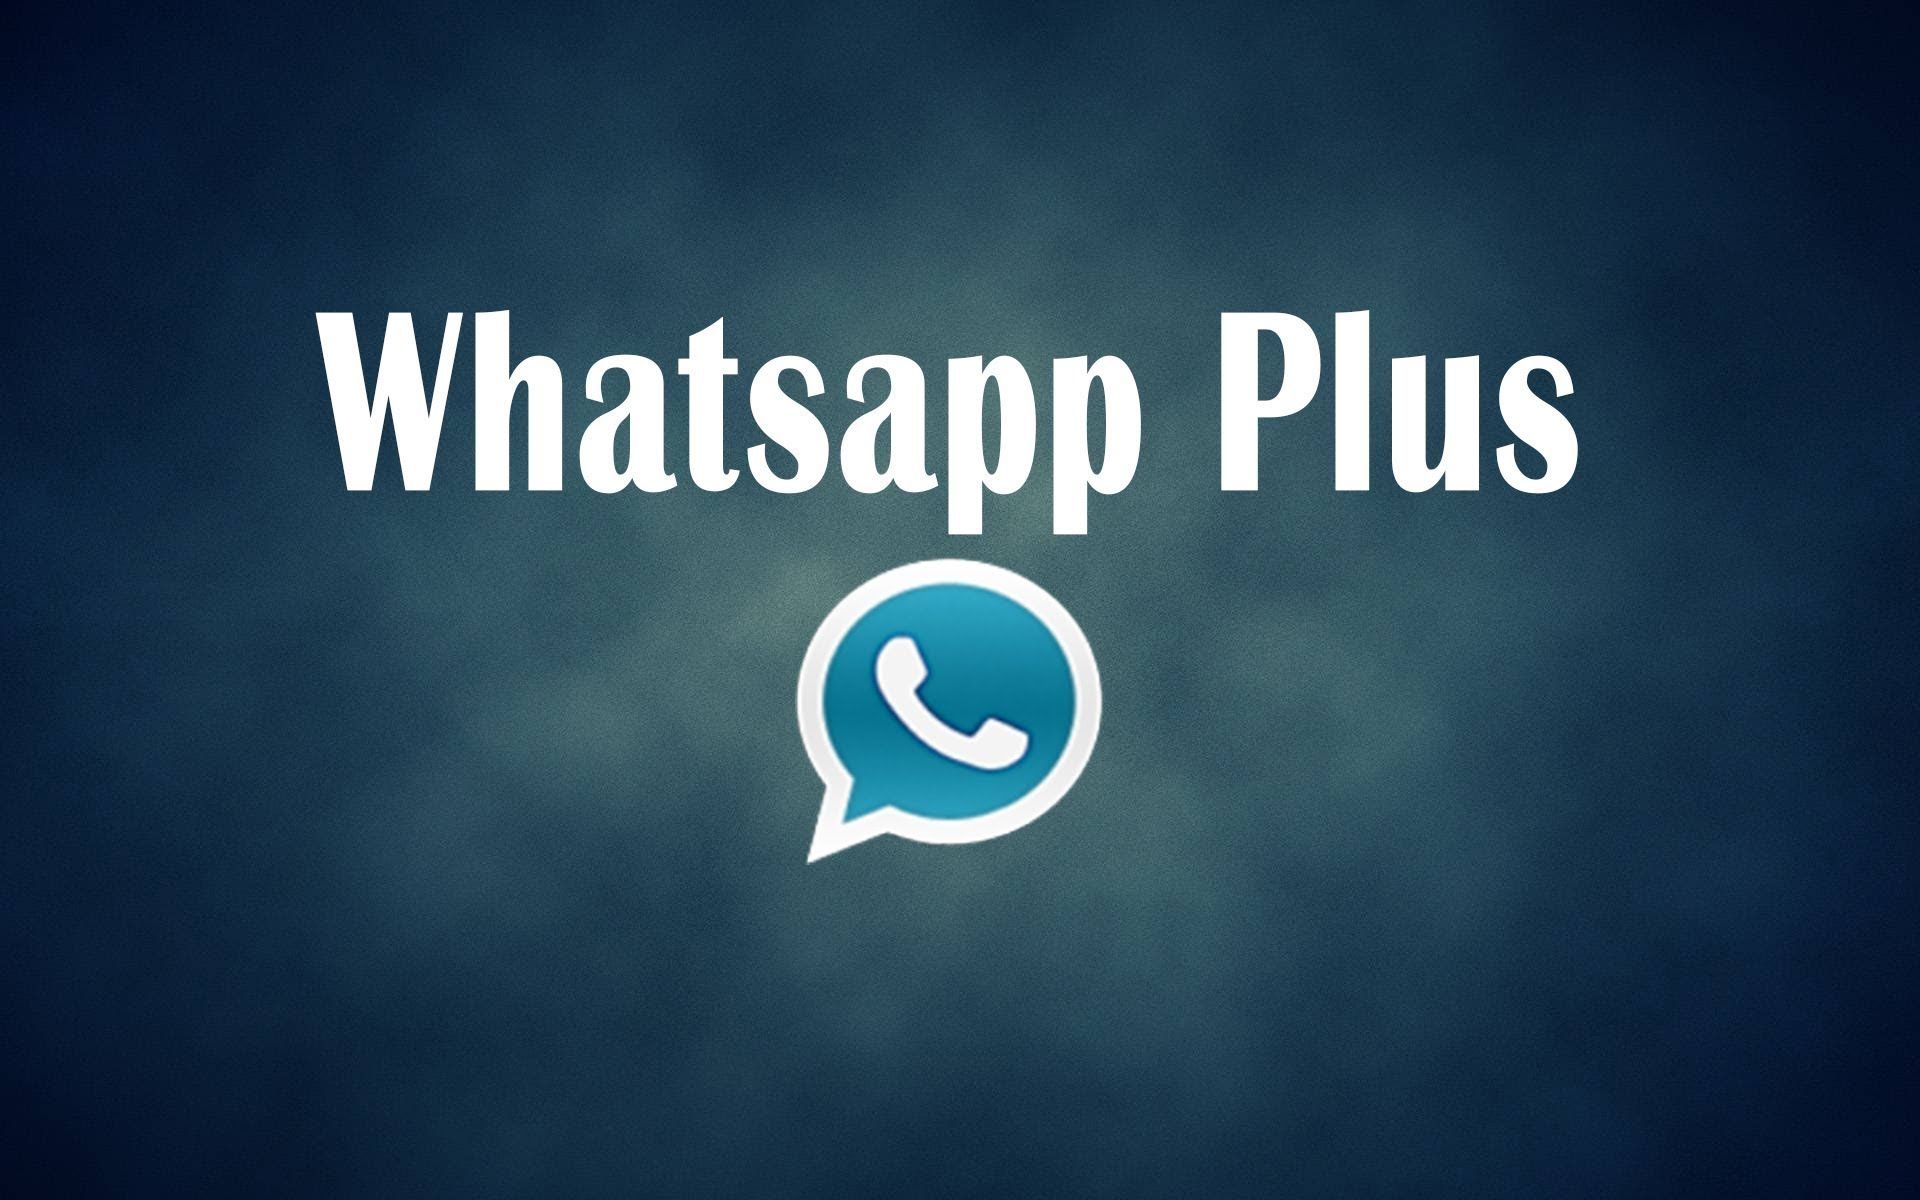 Download Whatsapp Plus Apk File For Android Latest Version